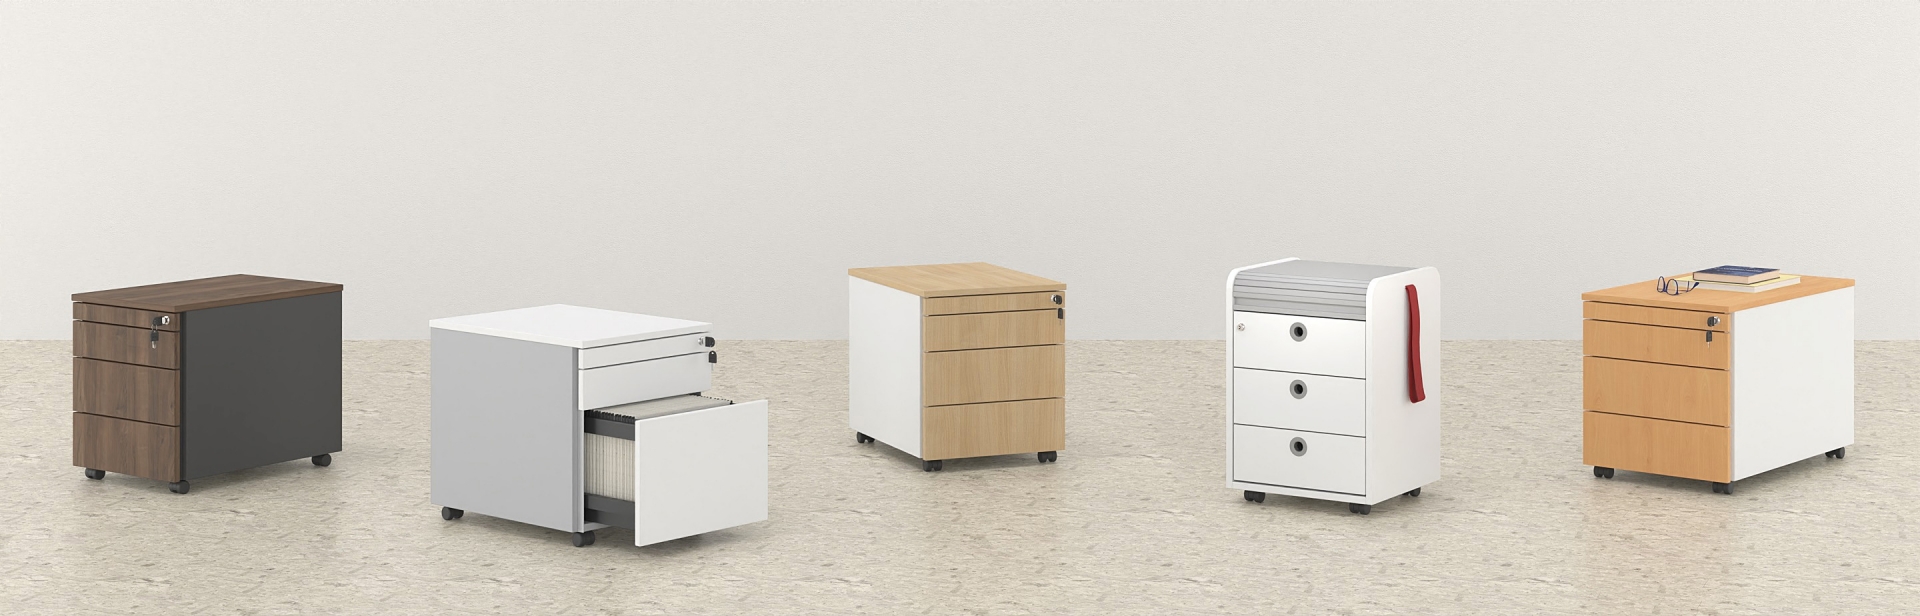 Office Pedestals With Locks Made Of A Variety Of Materials | Dromeas